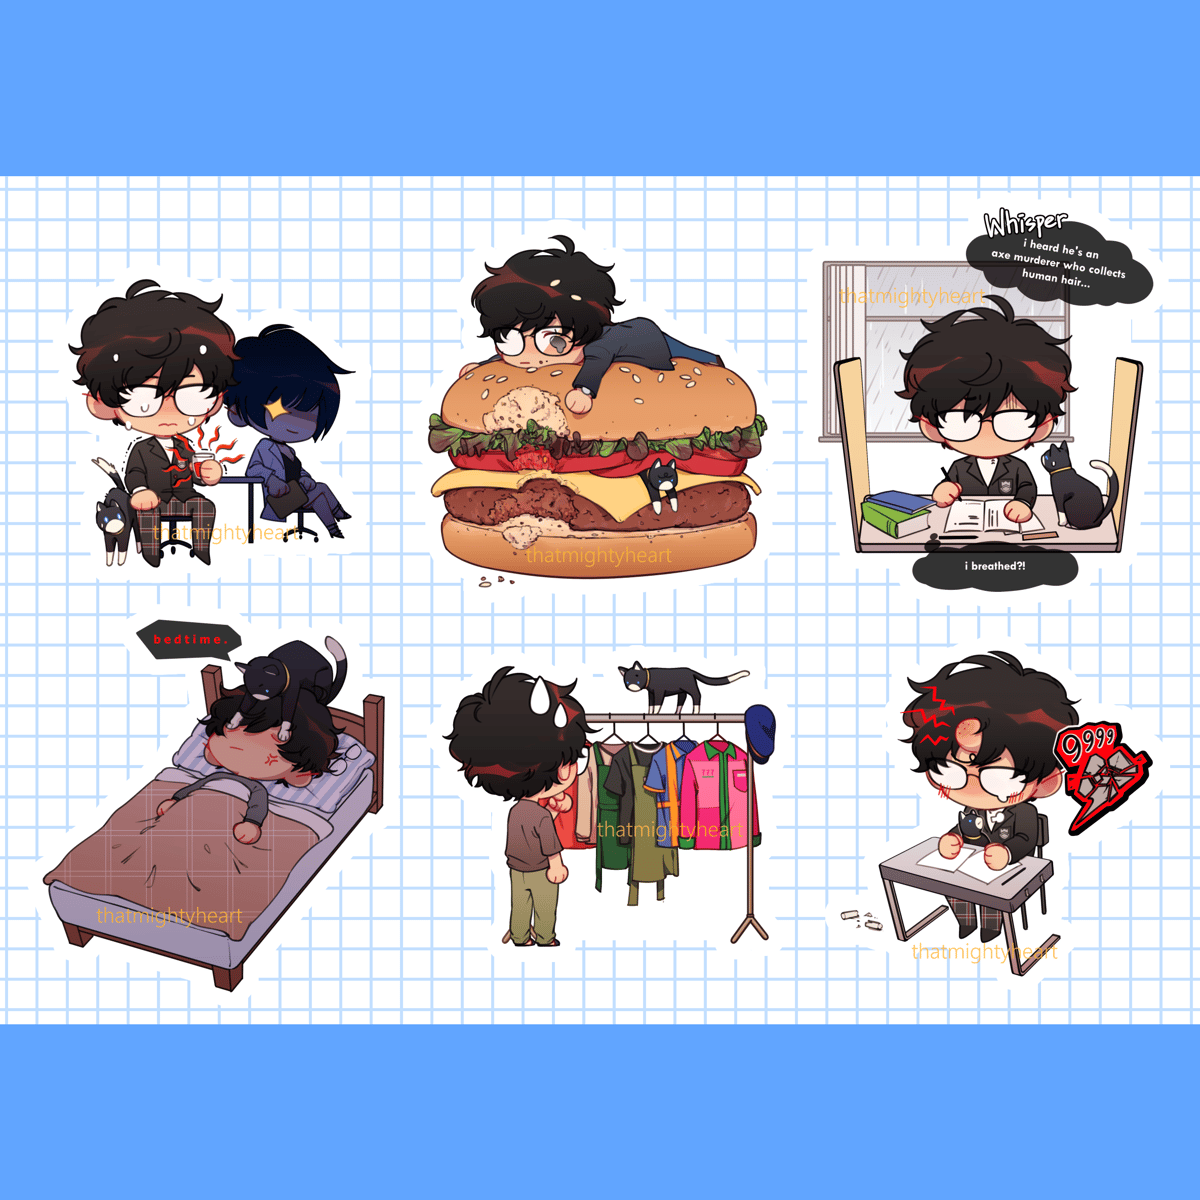 Image of [P5] daily life a5 sticker sheet